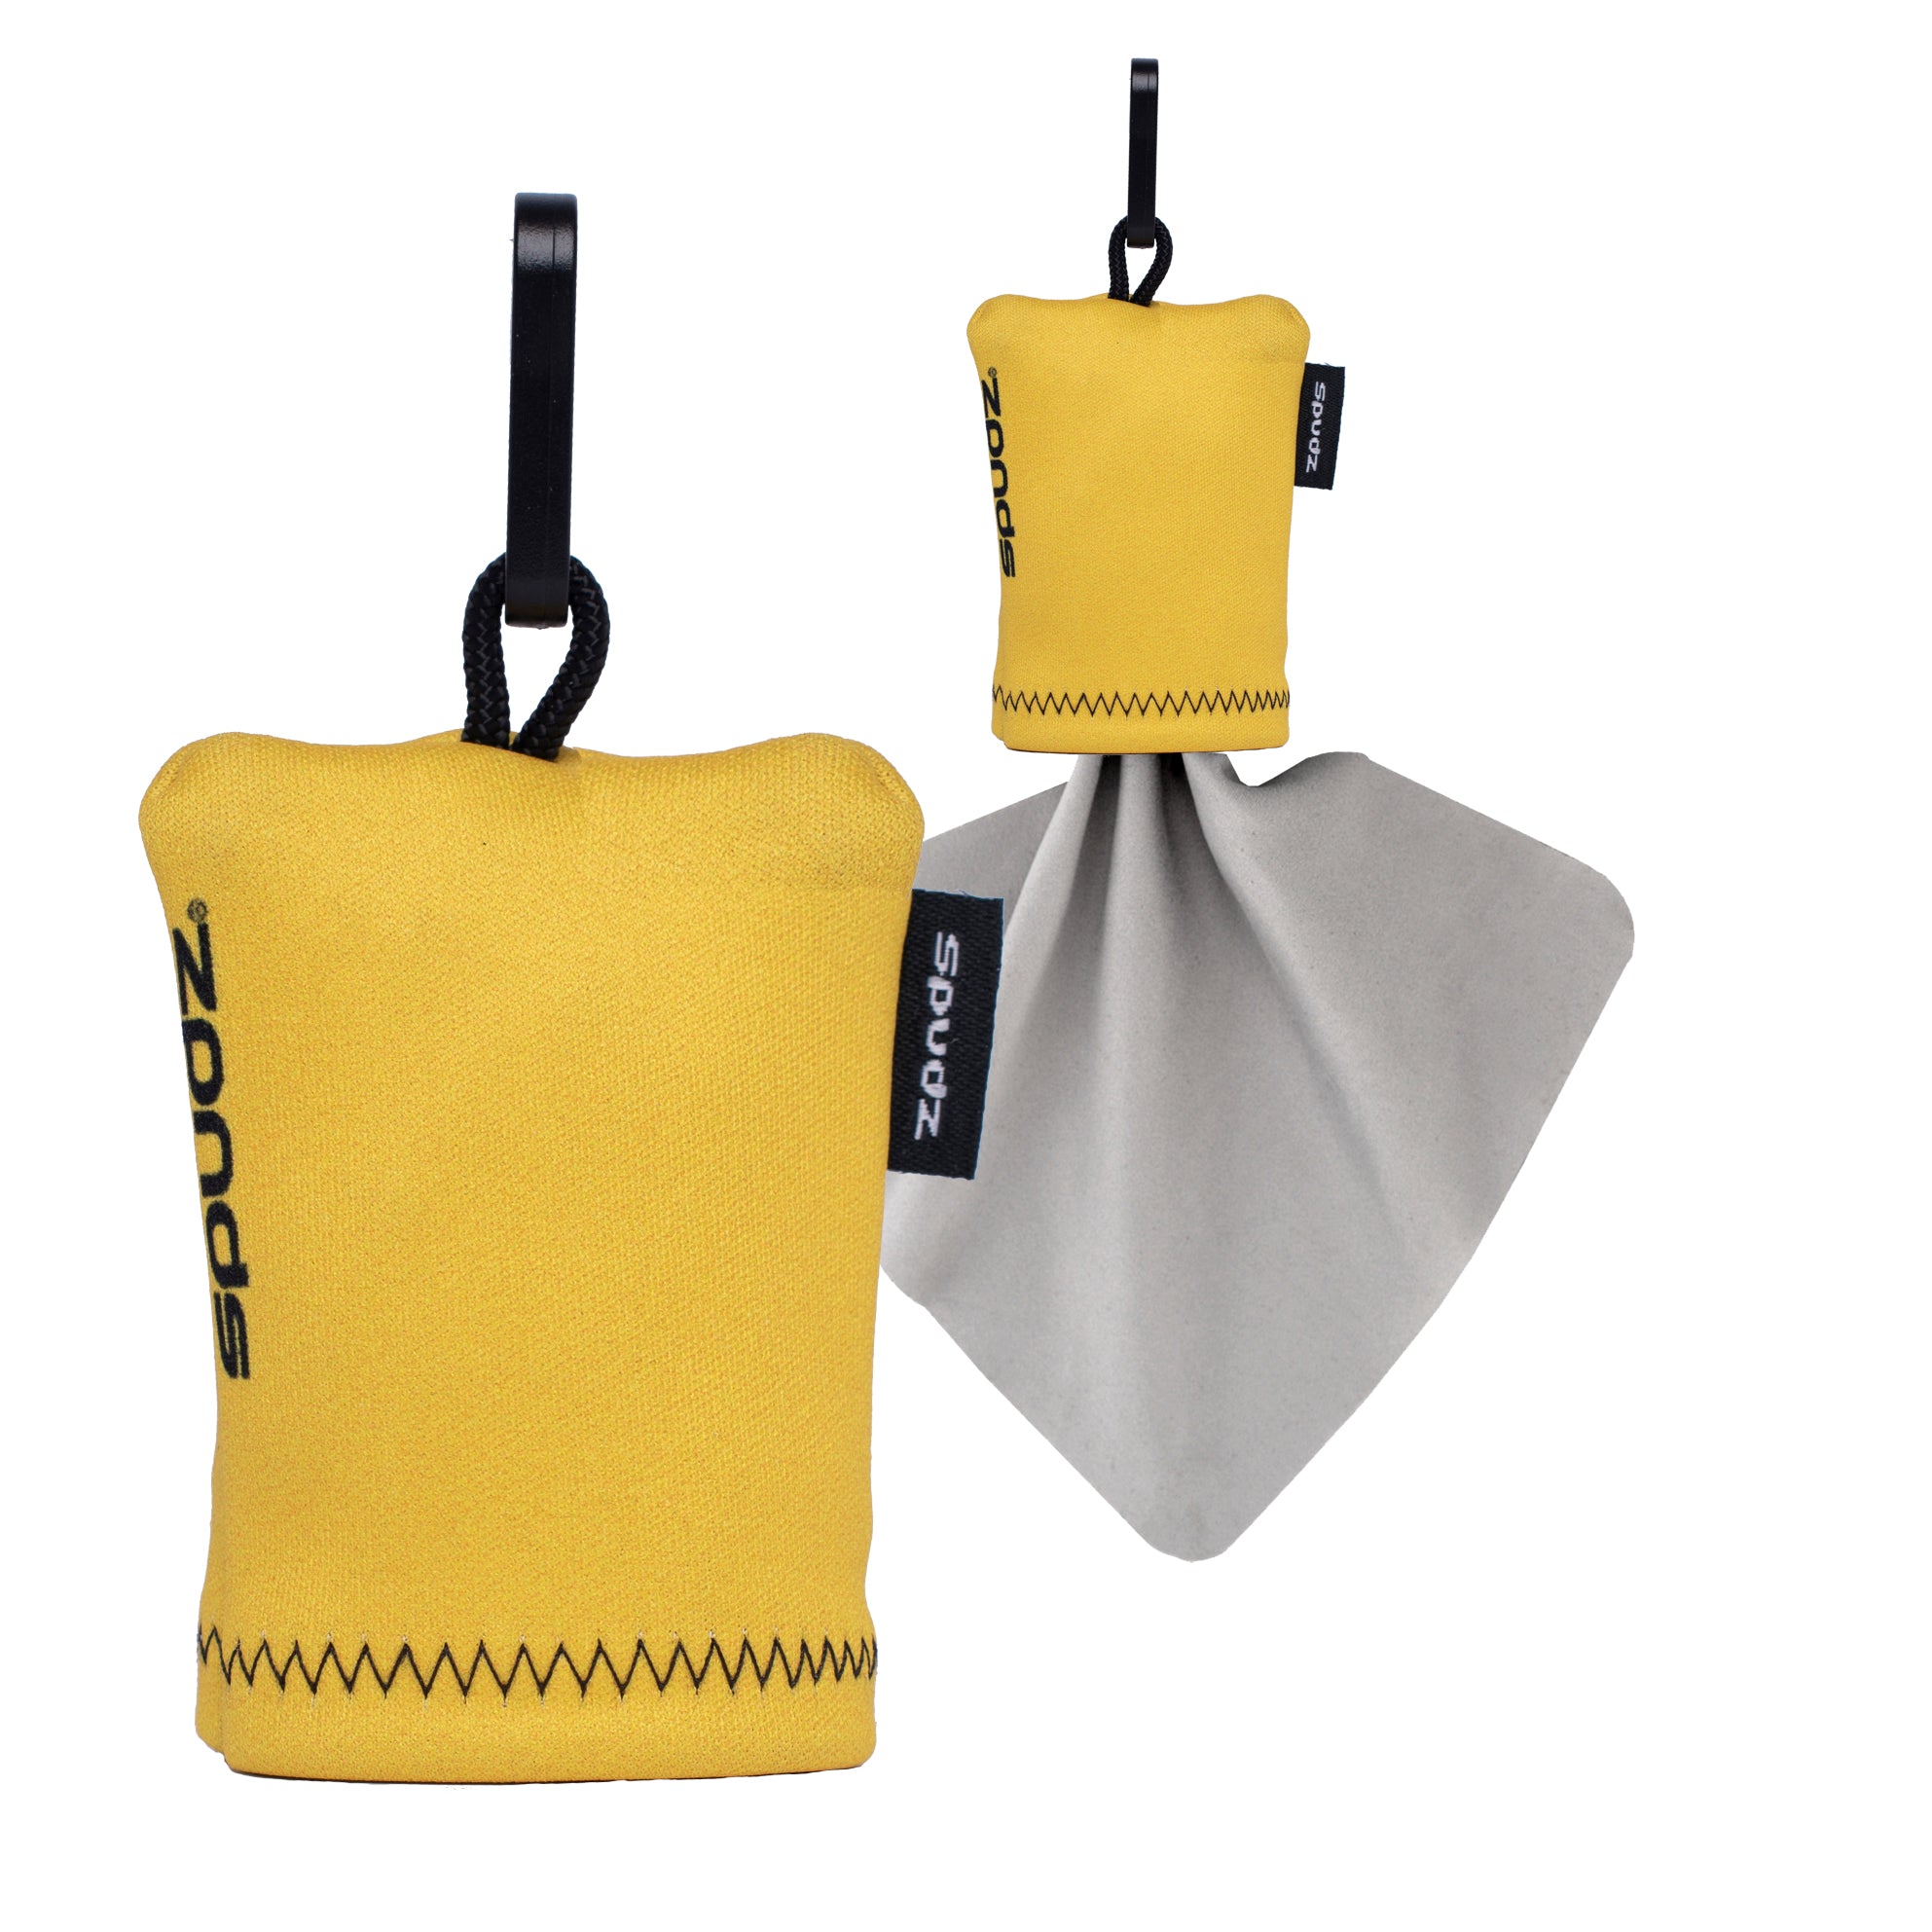 10 x 10 Classic Lens Cloth In Pouch (Yellow)